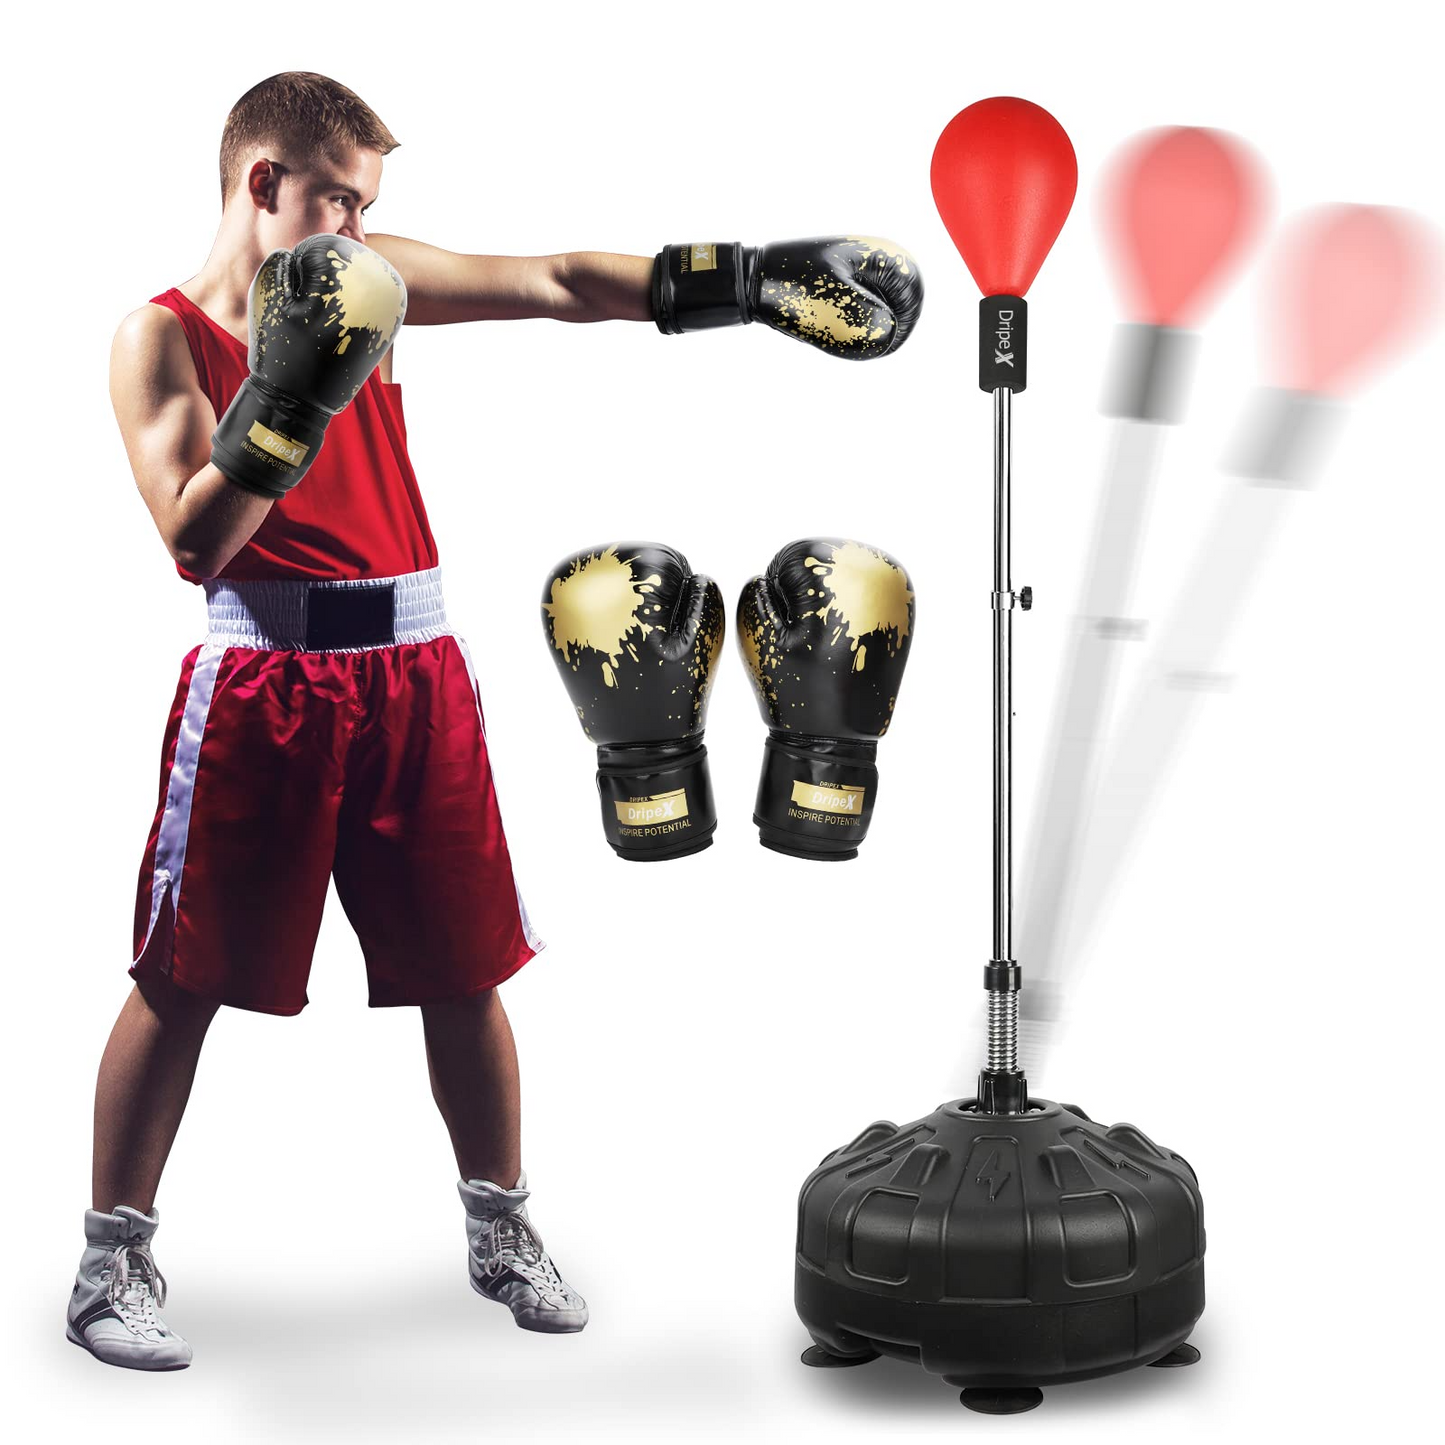 Dripex Speed Punch Ball with Adjustable Height Stand, Punching Bag with Boxing Gloves - Great for Boxing Equipment, MMA Training, Stress Fitness & Relief for Adults, Teens & Kids